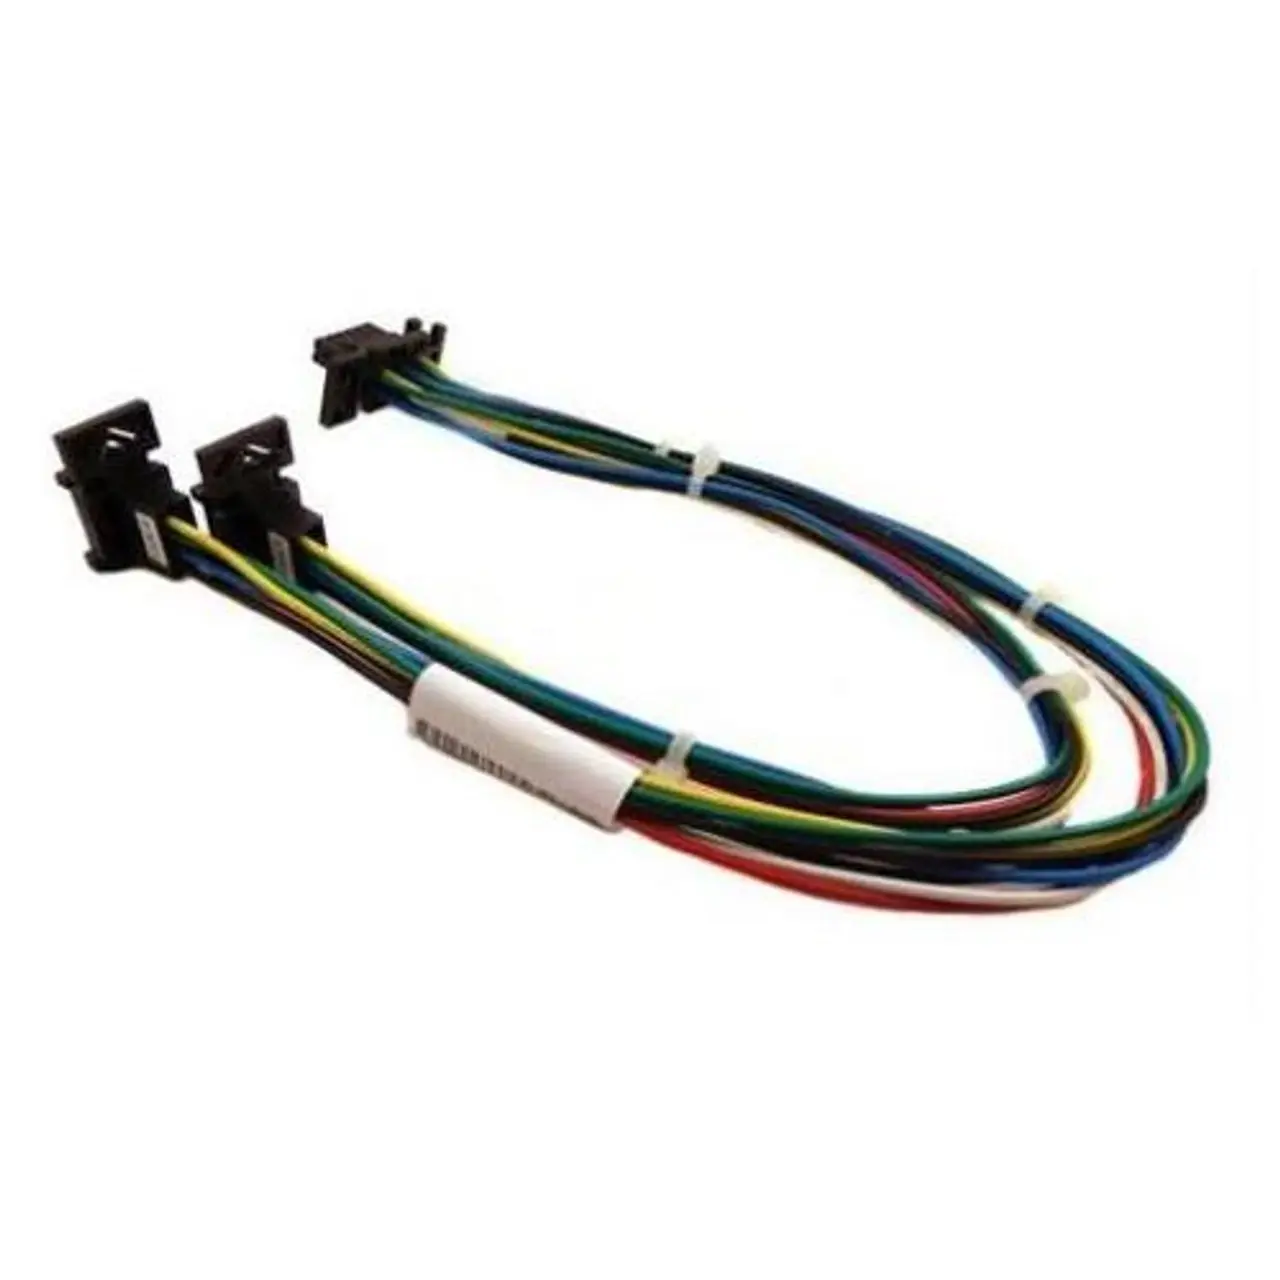 440918-001 HP LED Switch Cable Assembly for rP5700 Desk...